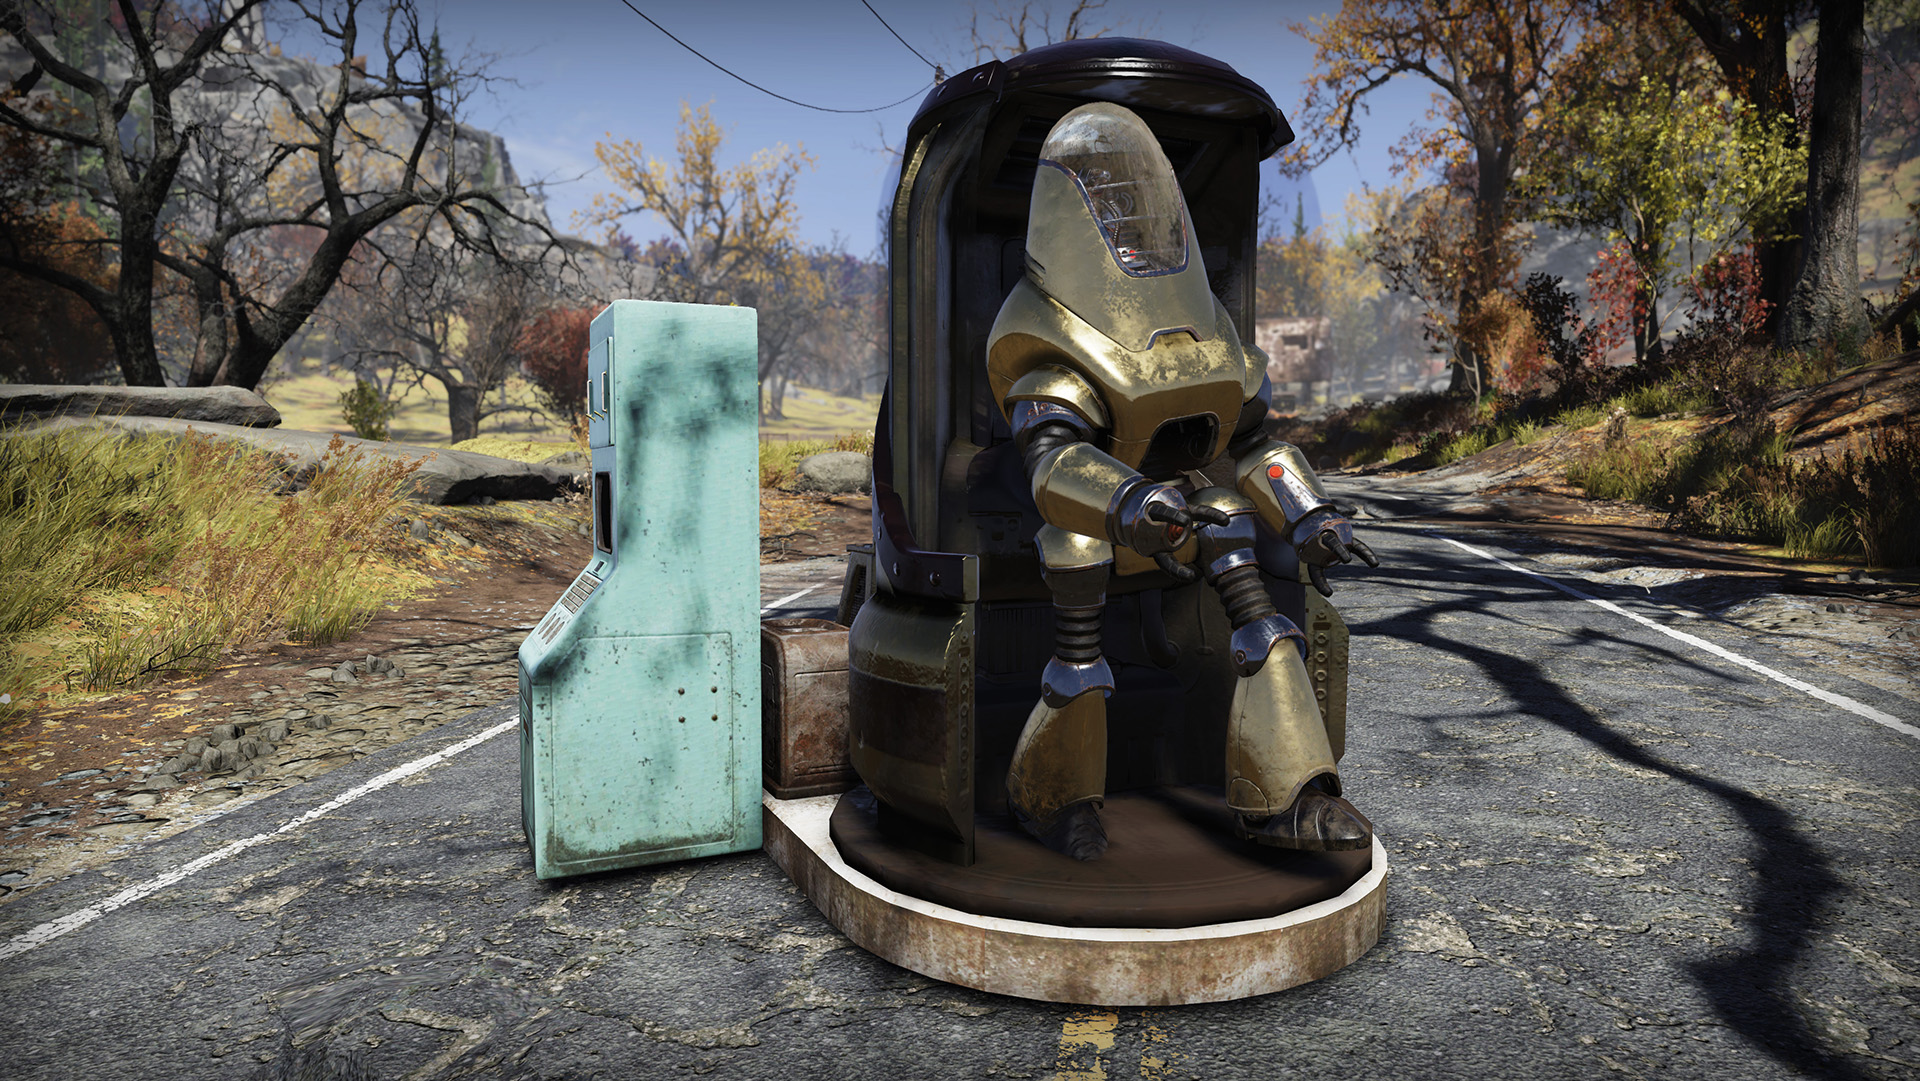 FALLOUT 76 INSIDE THE VAULT SEASON 3 AND QUALITYOFLIFE UPDATE